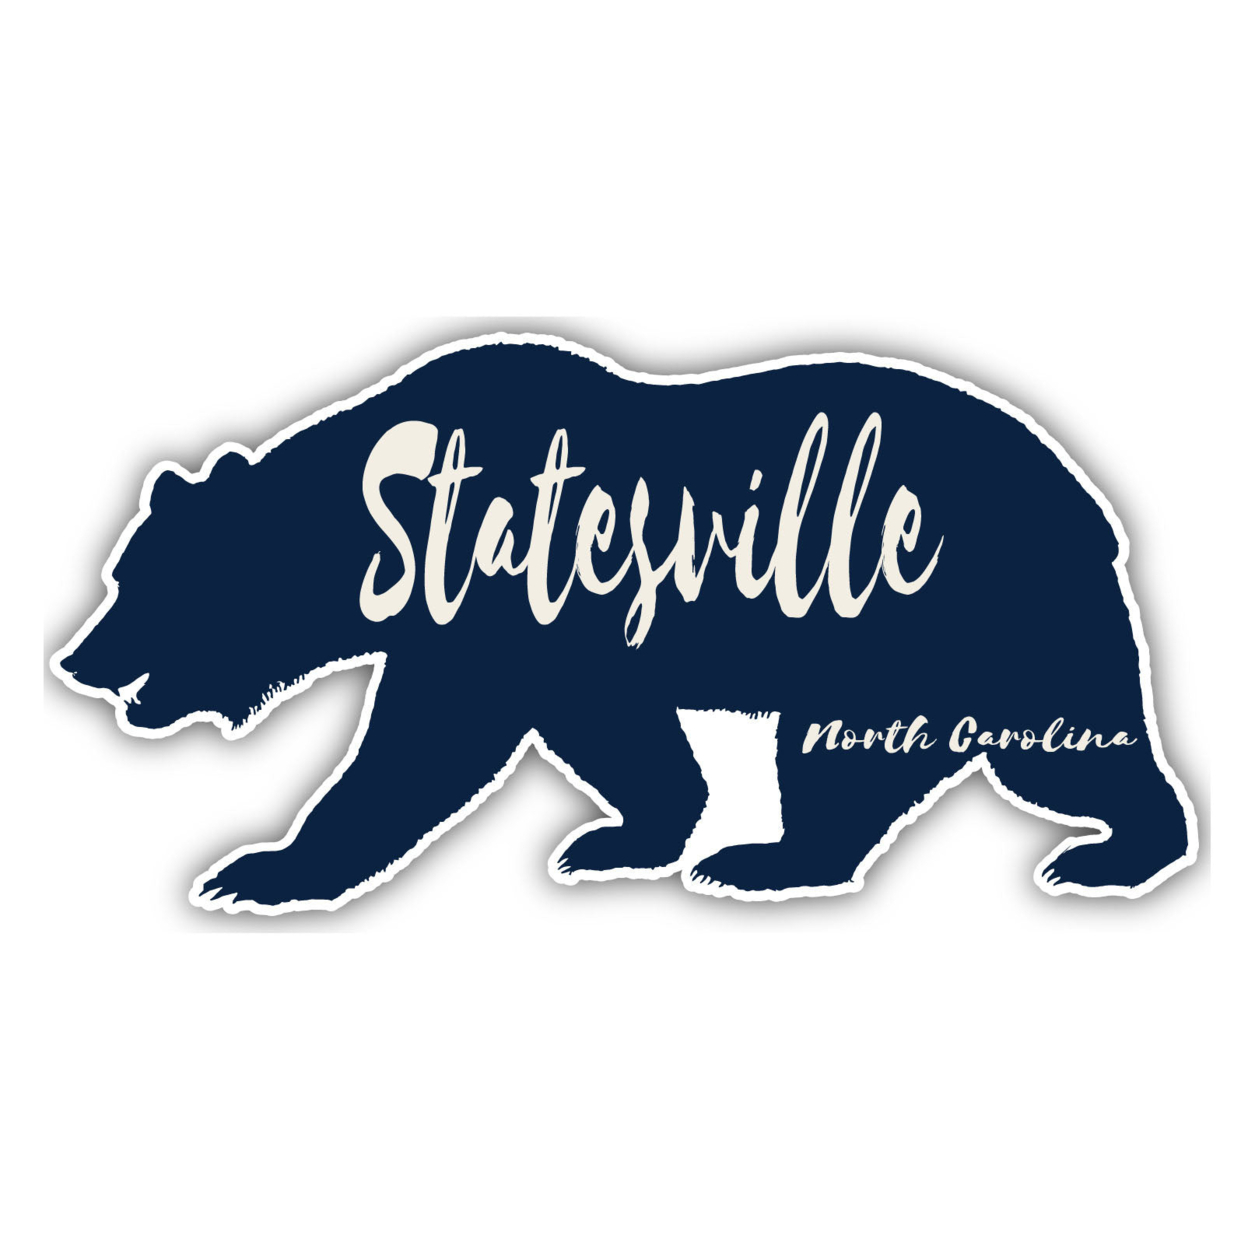 Statesville North Carolina Souvenir Decorative Stickers (Choose Theme And Size) - Single Unit, 4-Inch, Great Outdoors